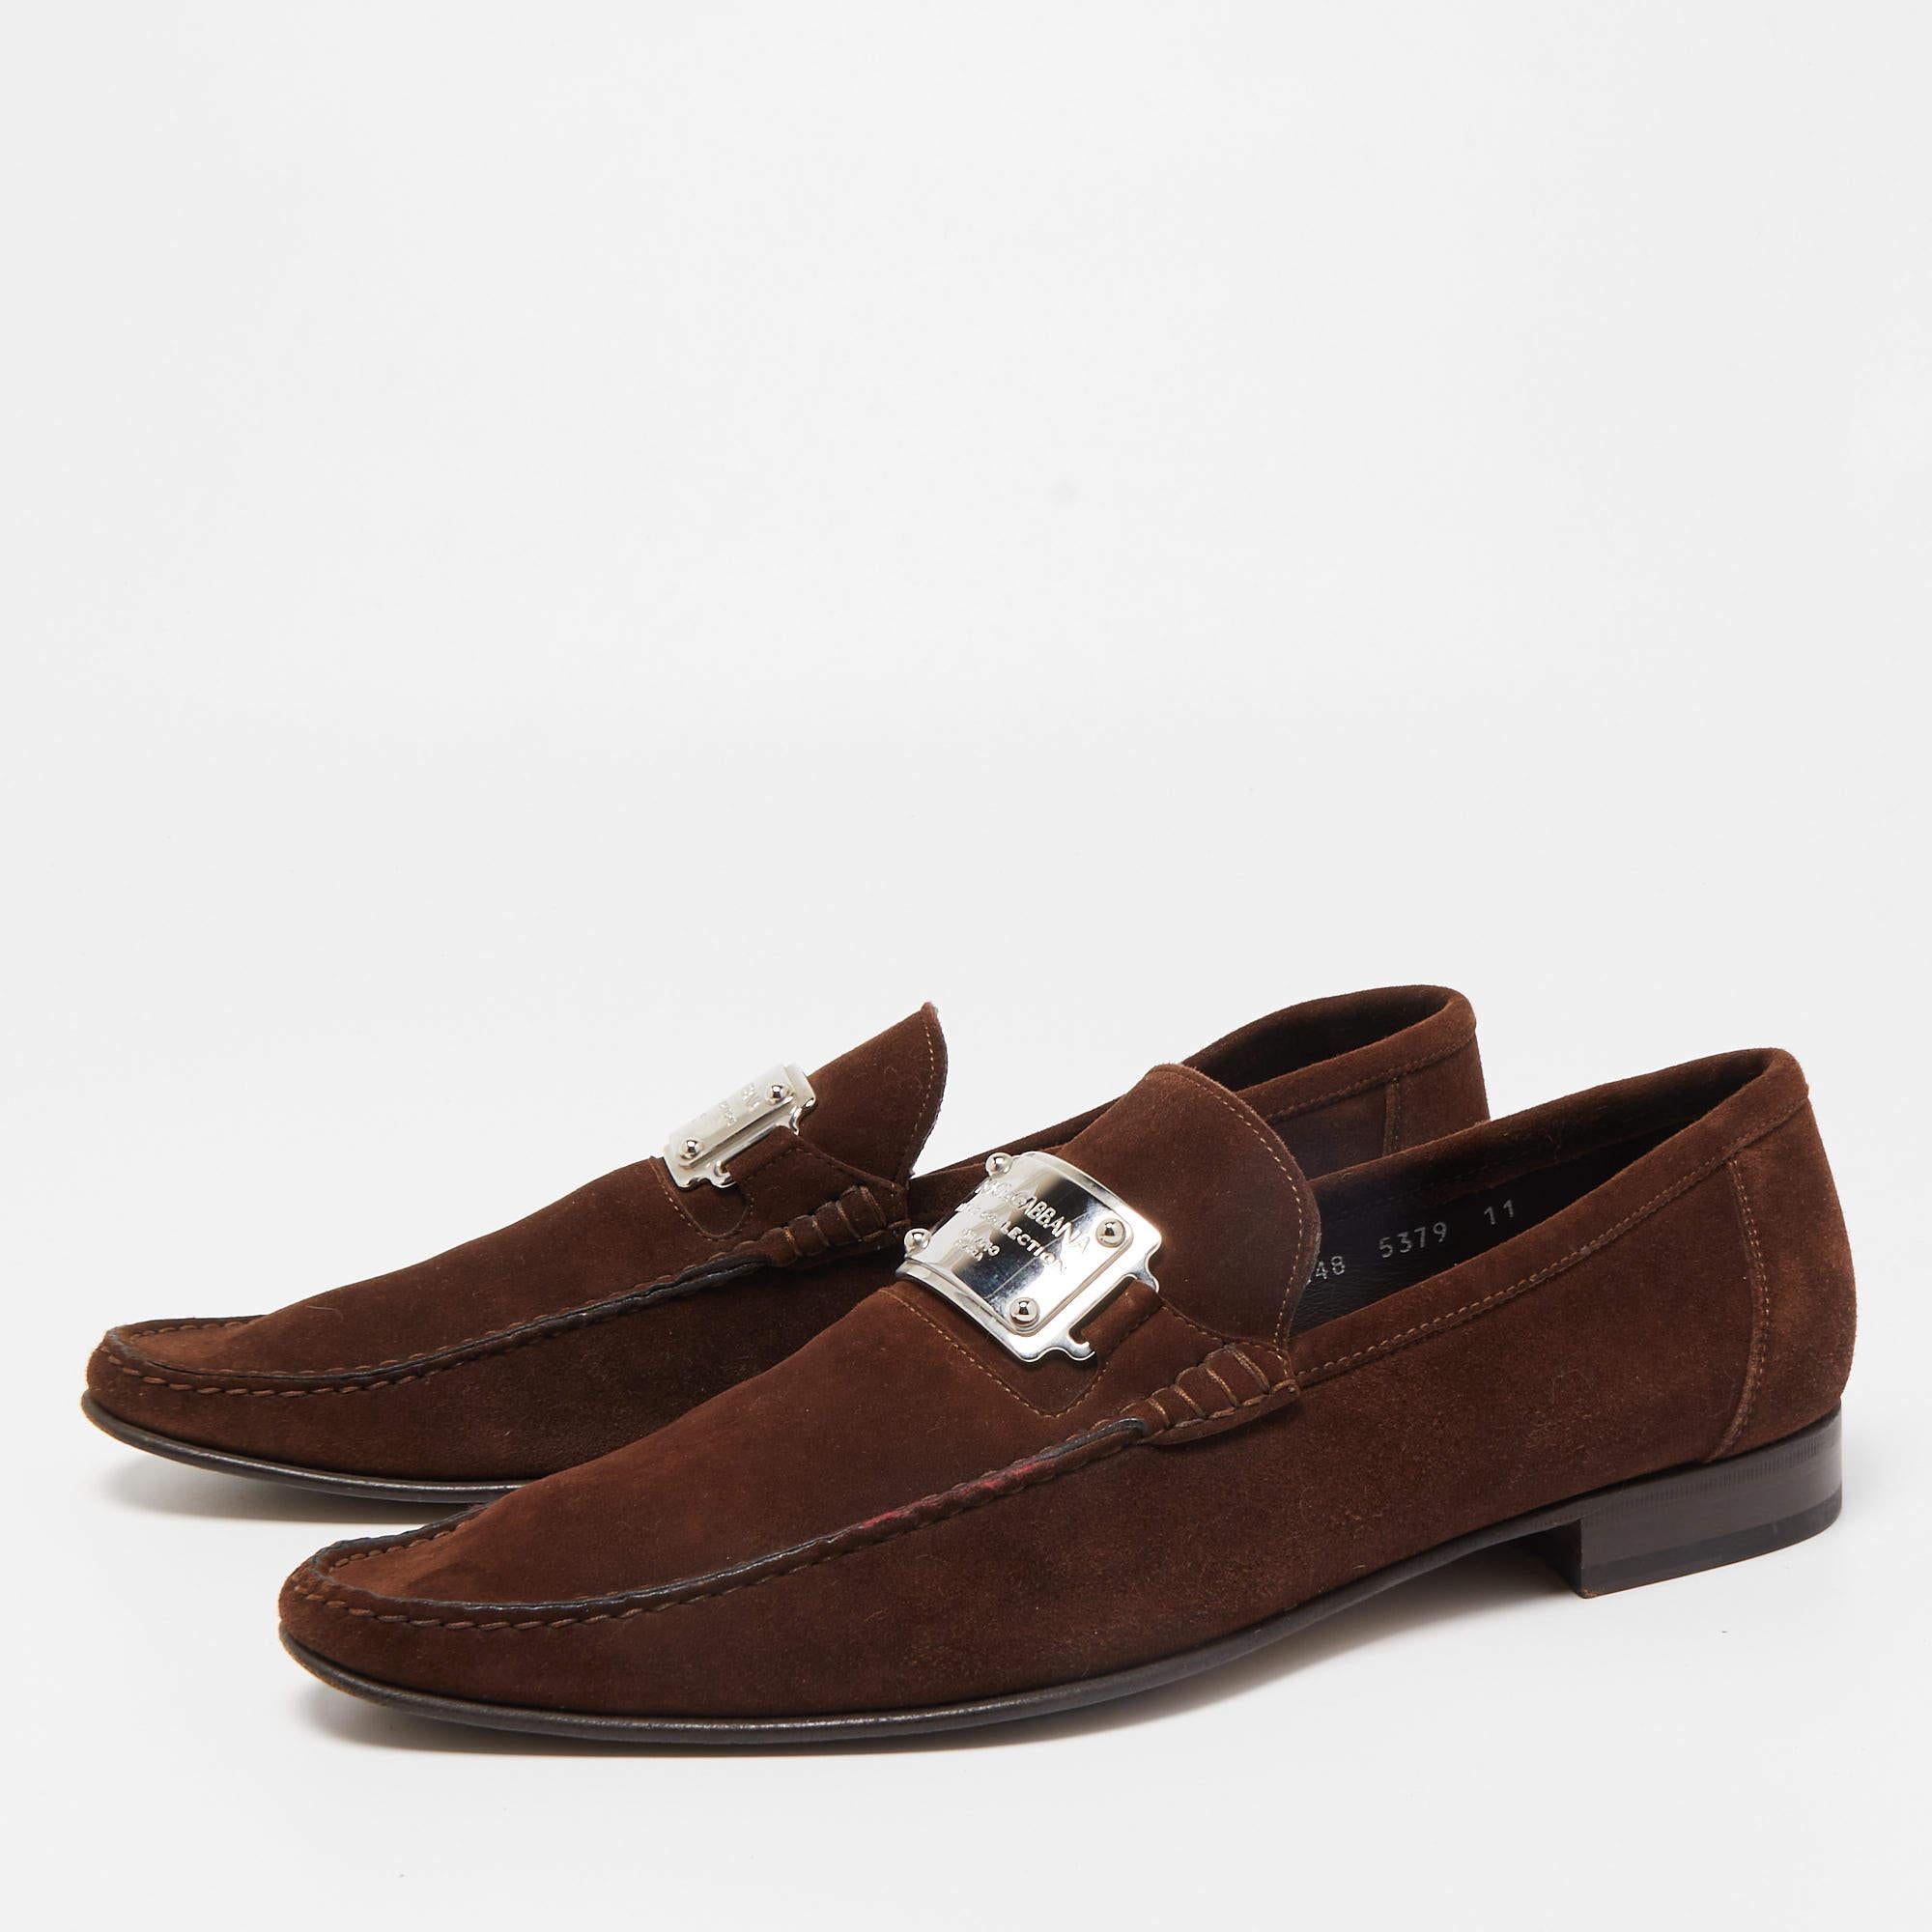 Dolce & Gabbana Brown Suede And Leather Logo Plate Slip On Loafers Size 45 In Good Condition For Sale In Dubai, Al Qouz 2